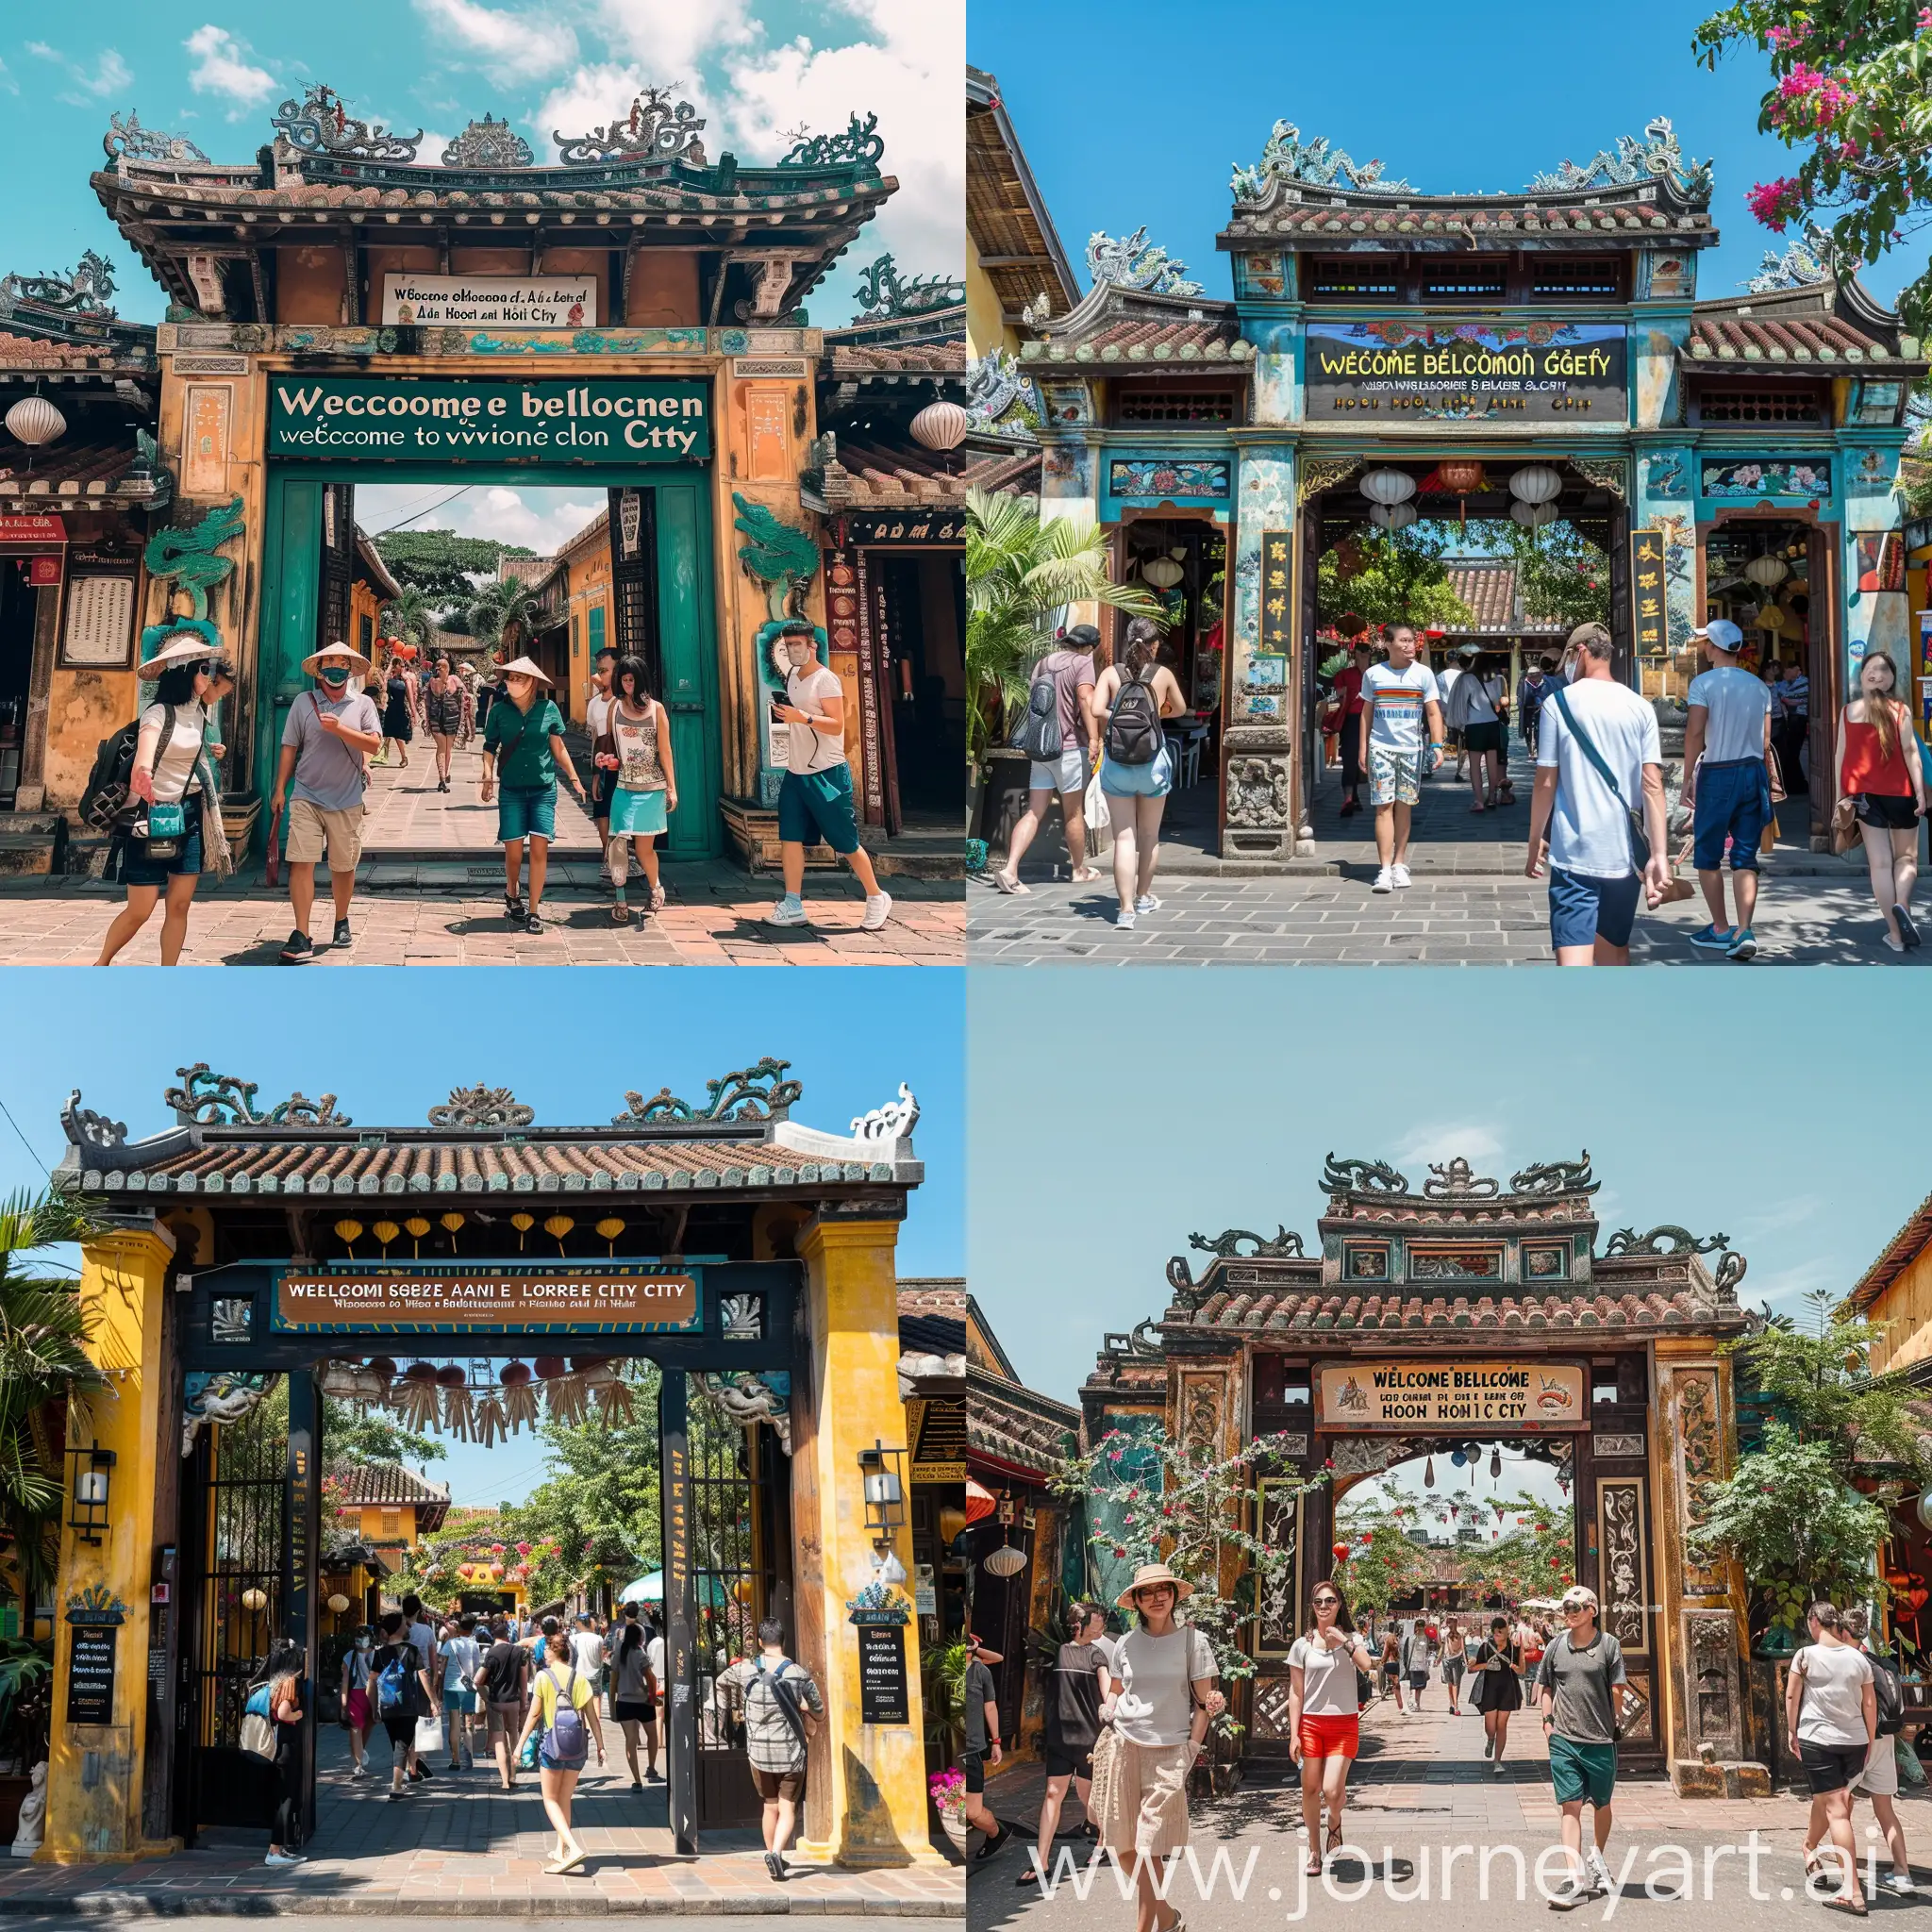 Hoi-An-Old-Quarter-Gate-Welcoming-Billionaires-and-Lovers-to-Explore-the-City